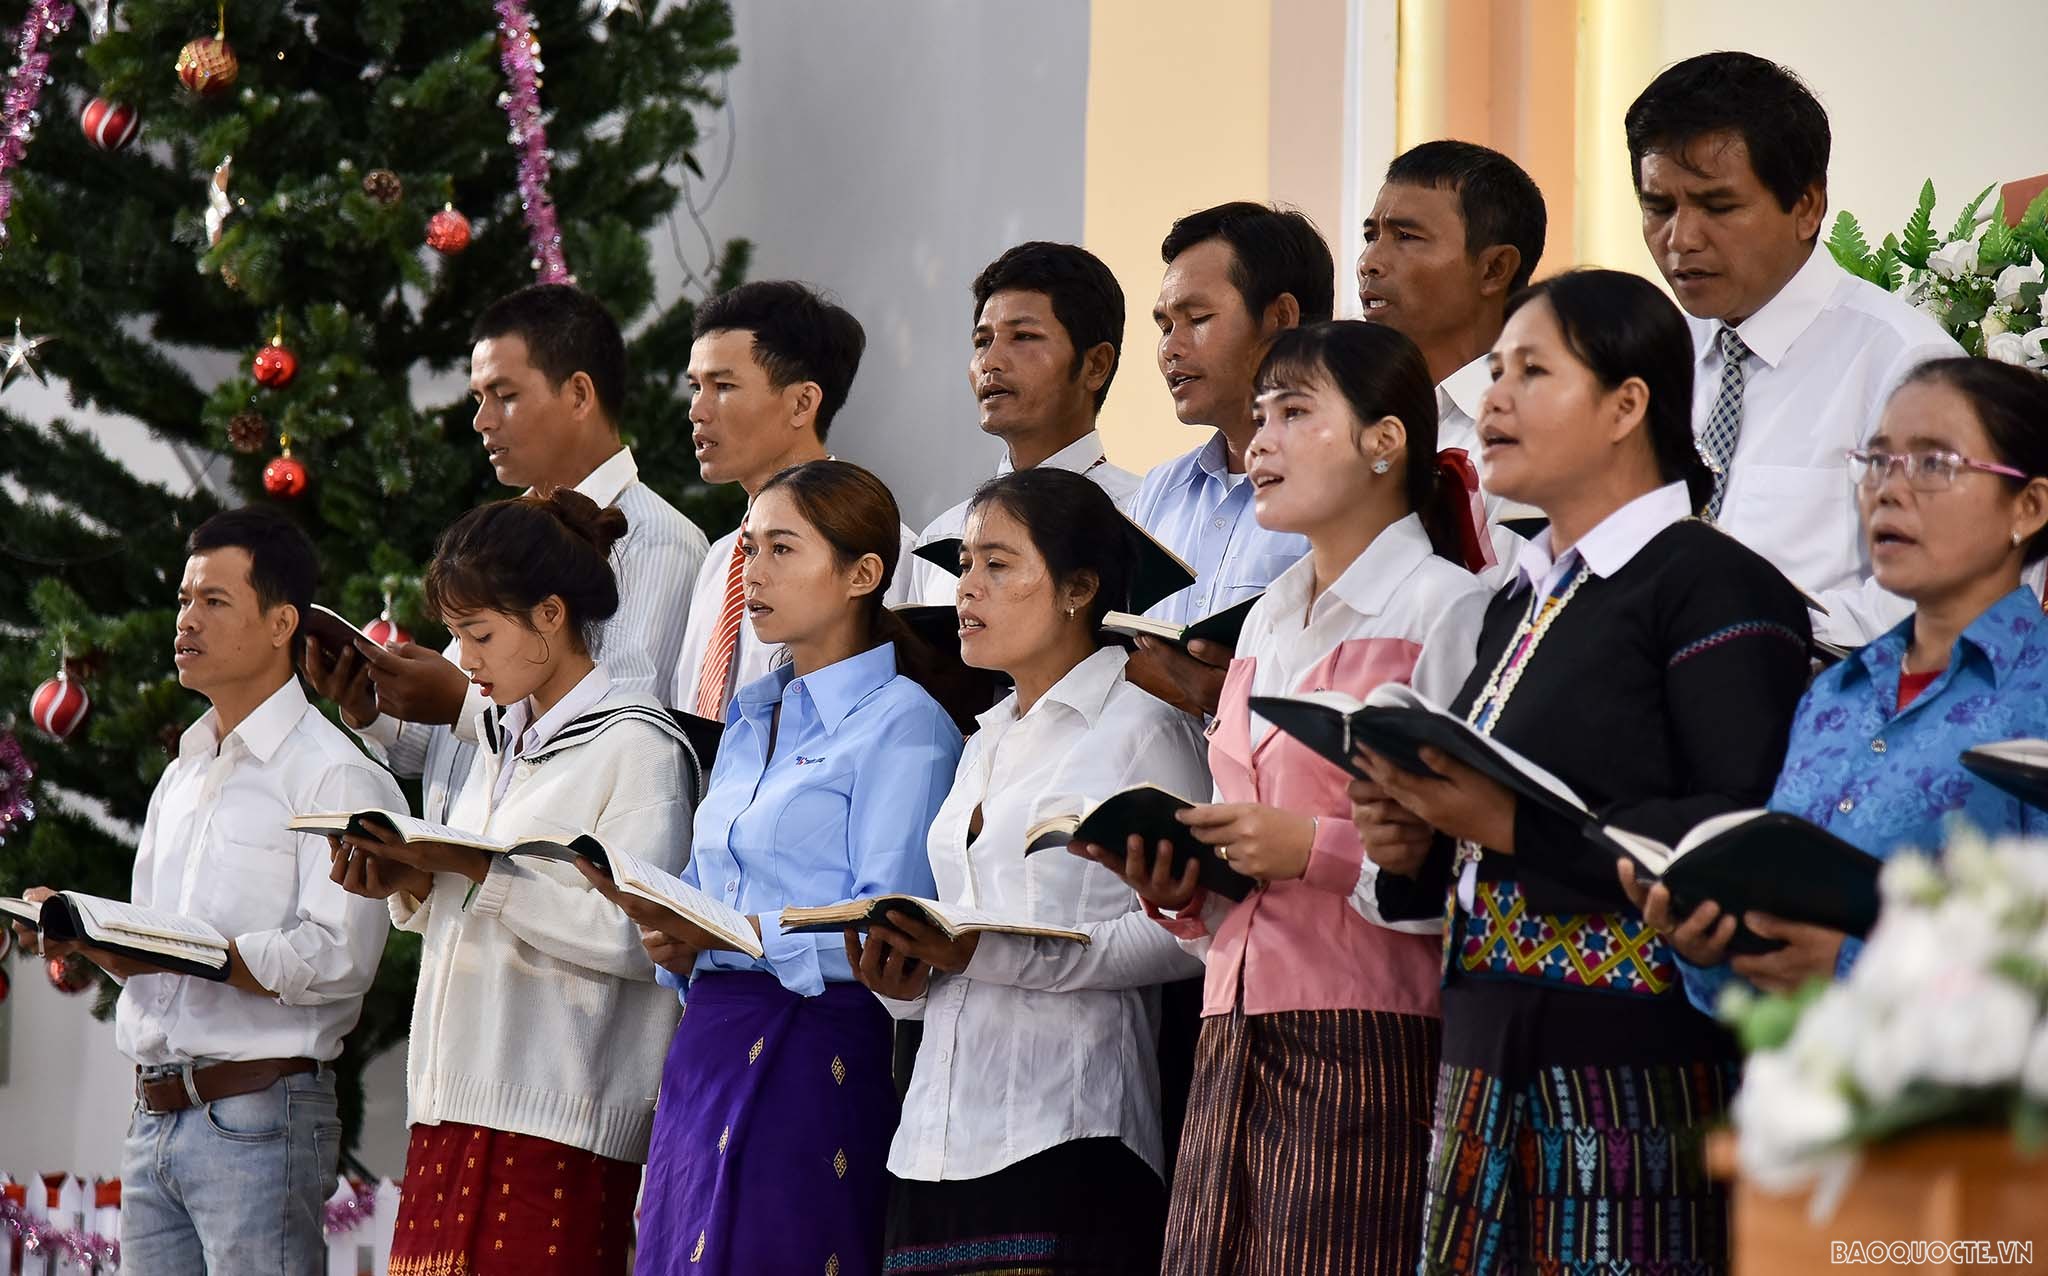 Faith and religious life develop together with the country